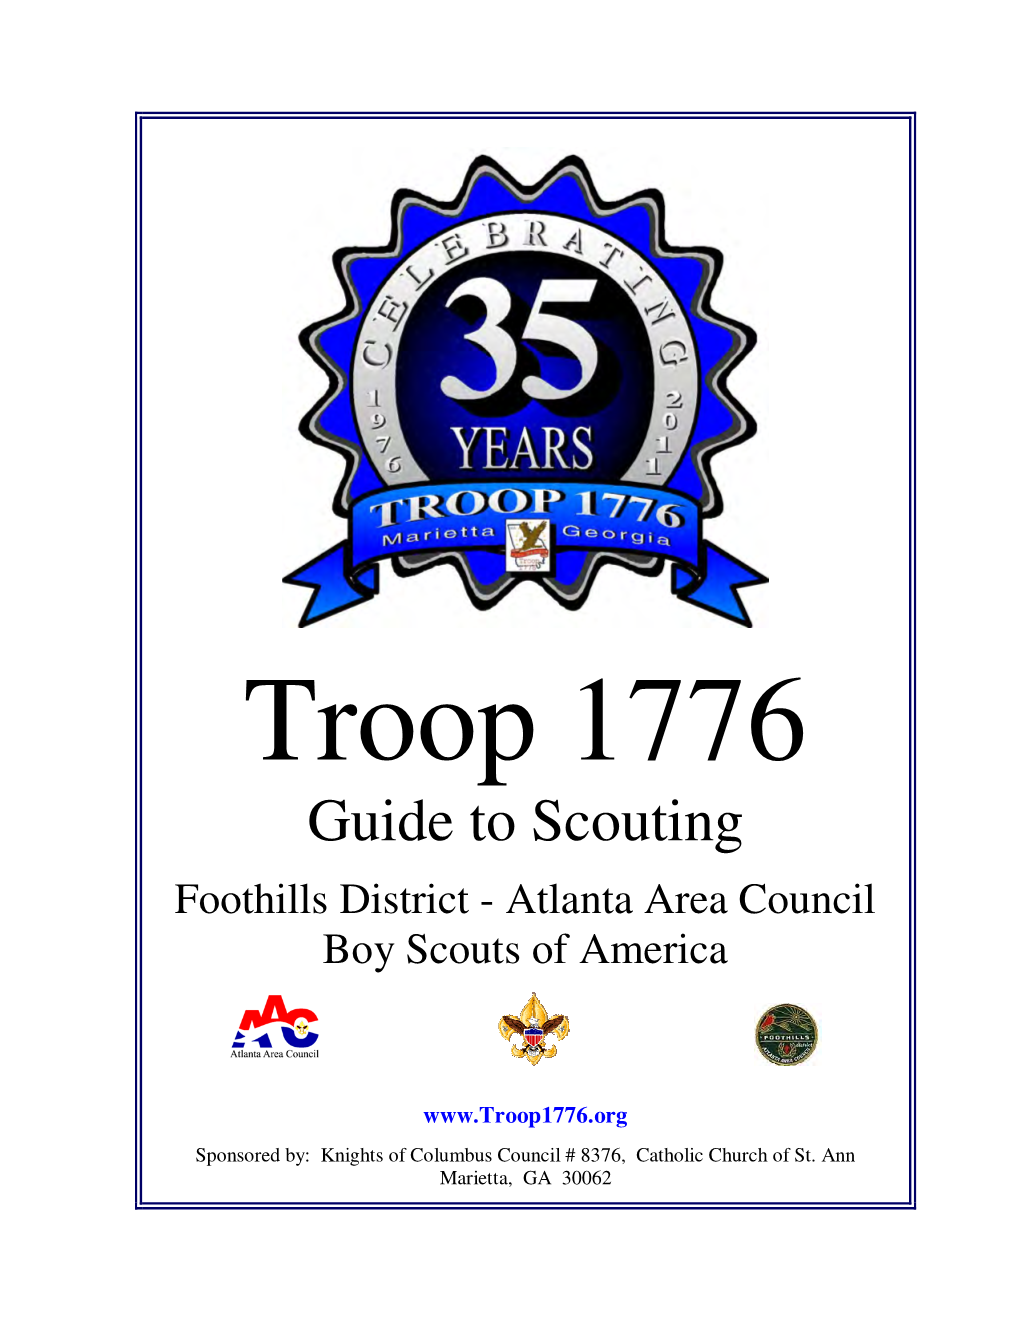 Guide to Scouting